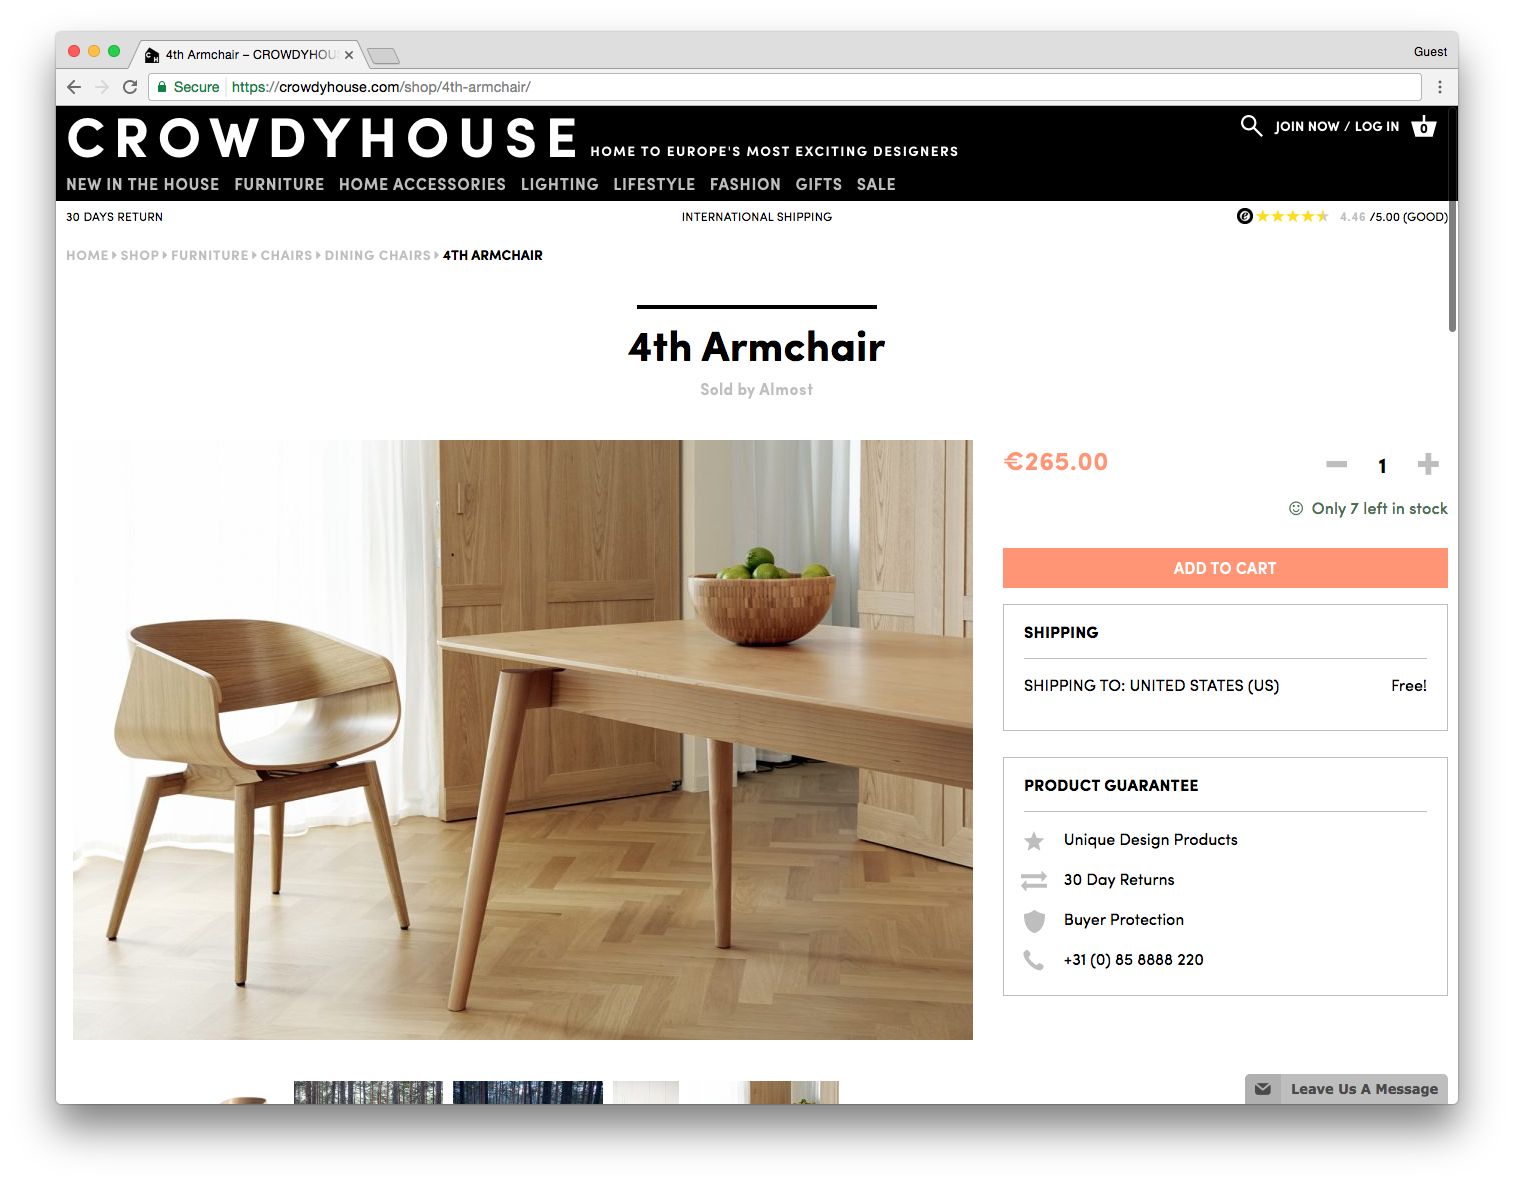 CROWDYHOUSE 4th Armchair Sold by Almost